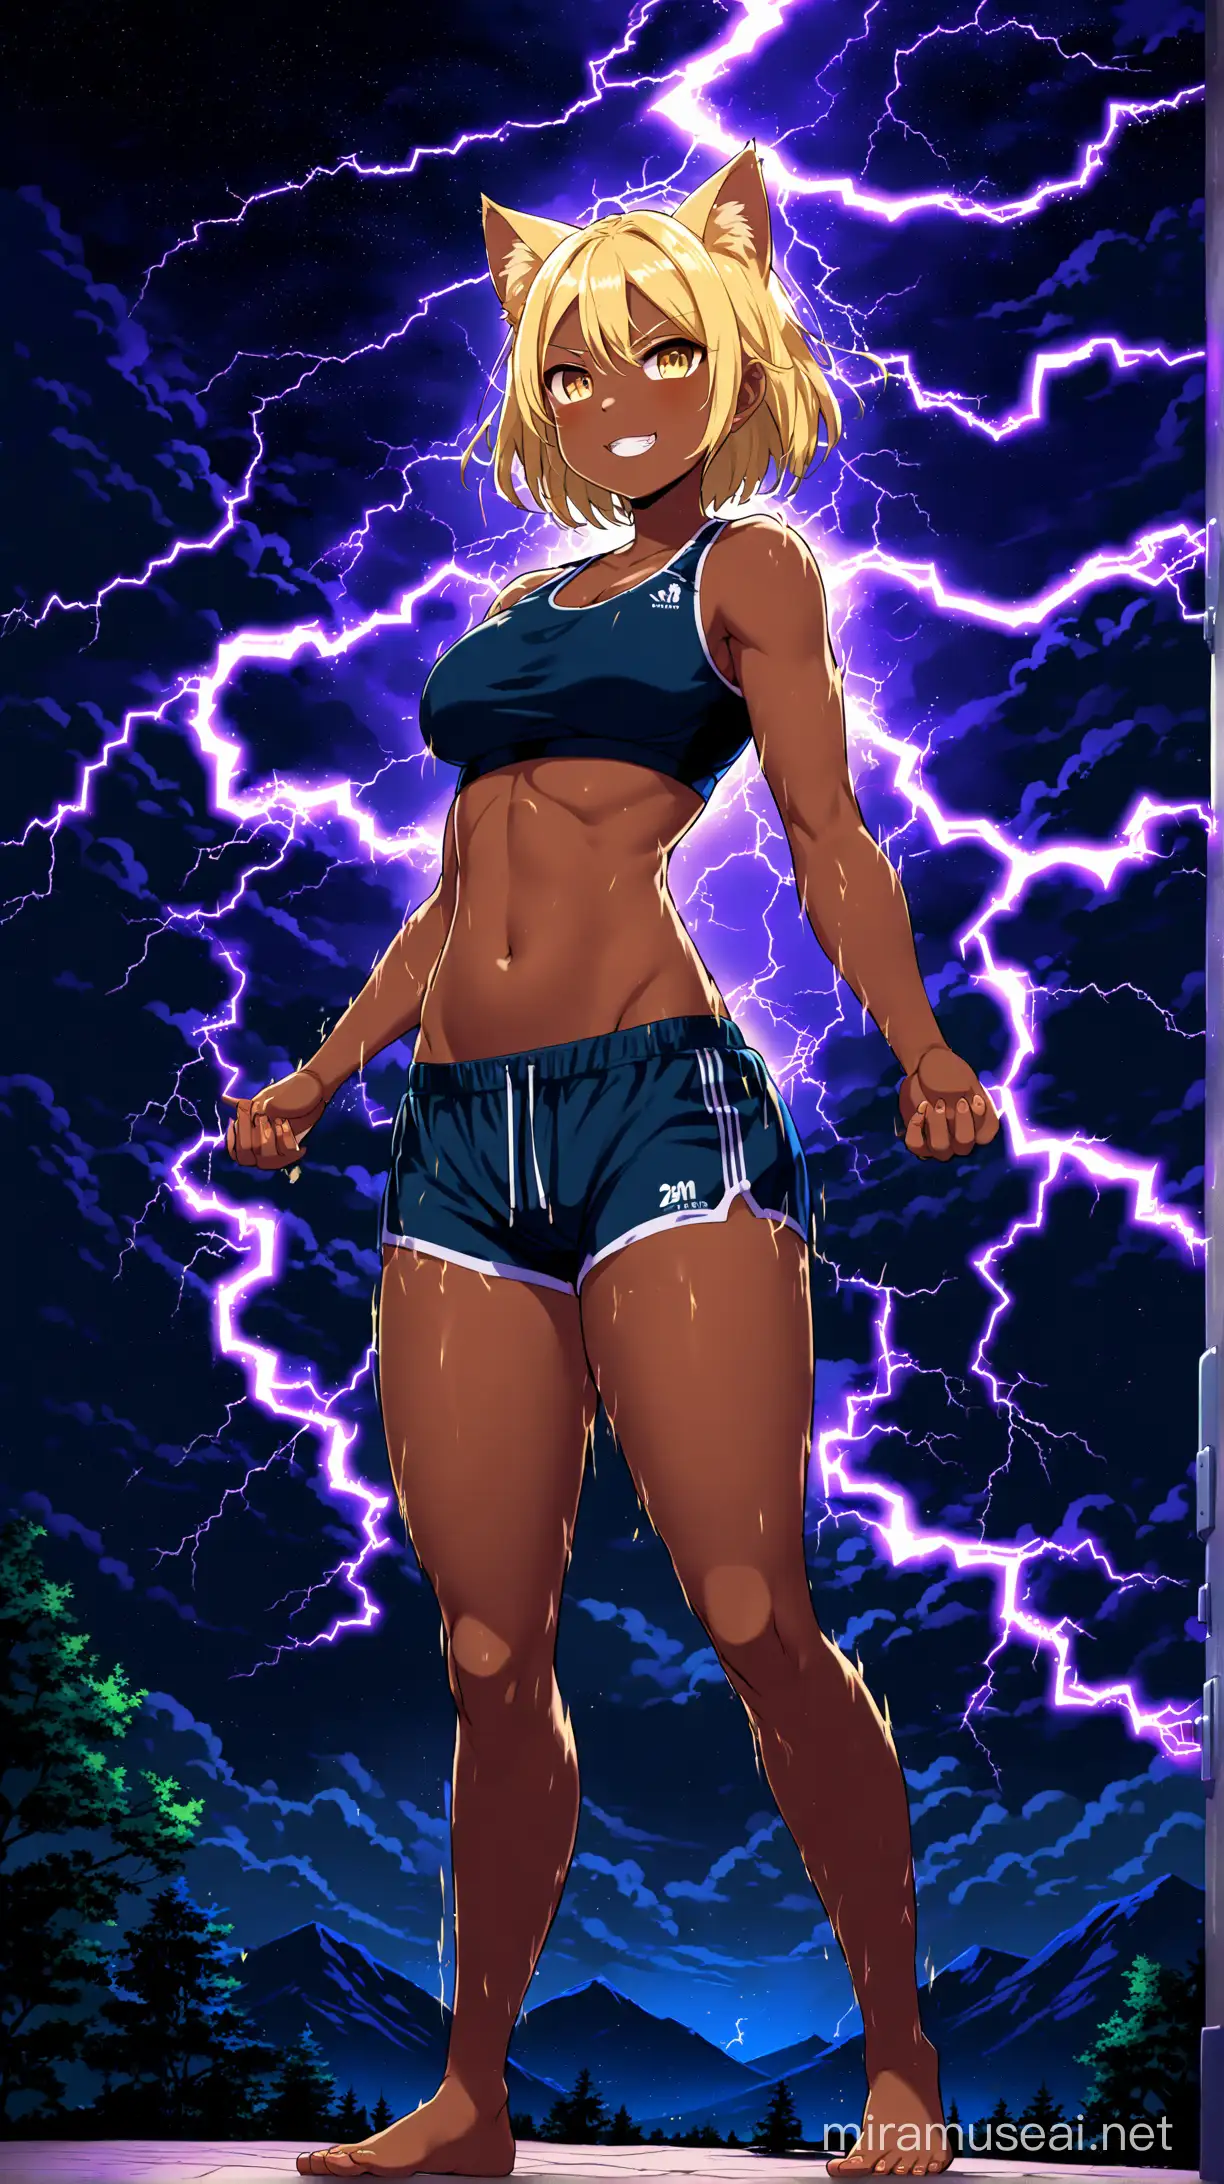 Electric Mountain Temptress Blonde Catgirl in Lightning Storm